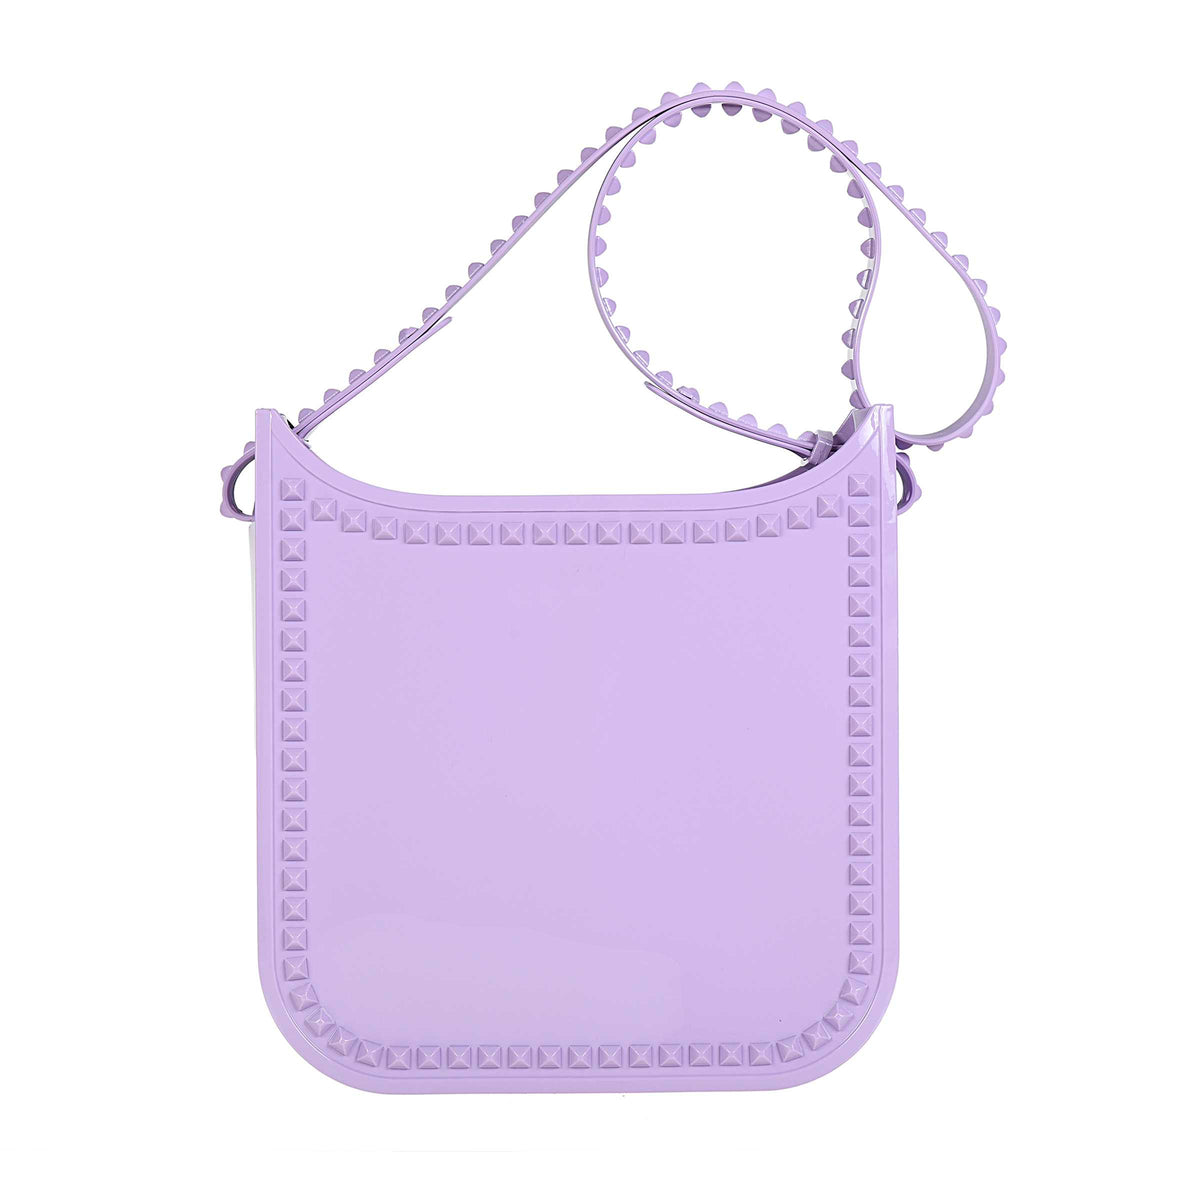 Violet rubber beach bag with studded design all over the bag